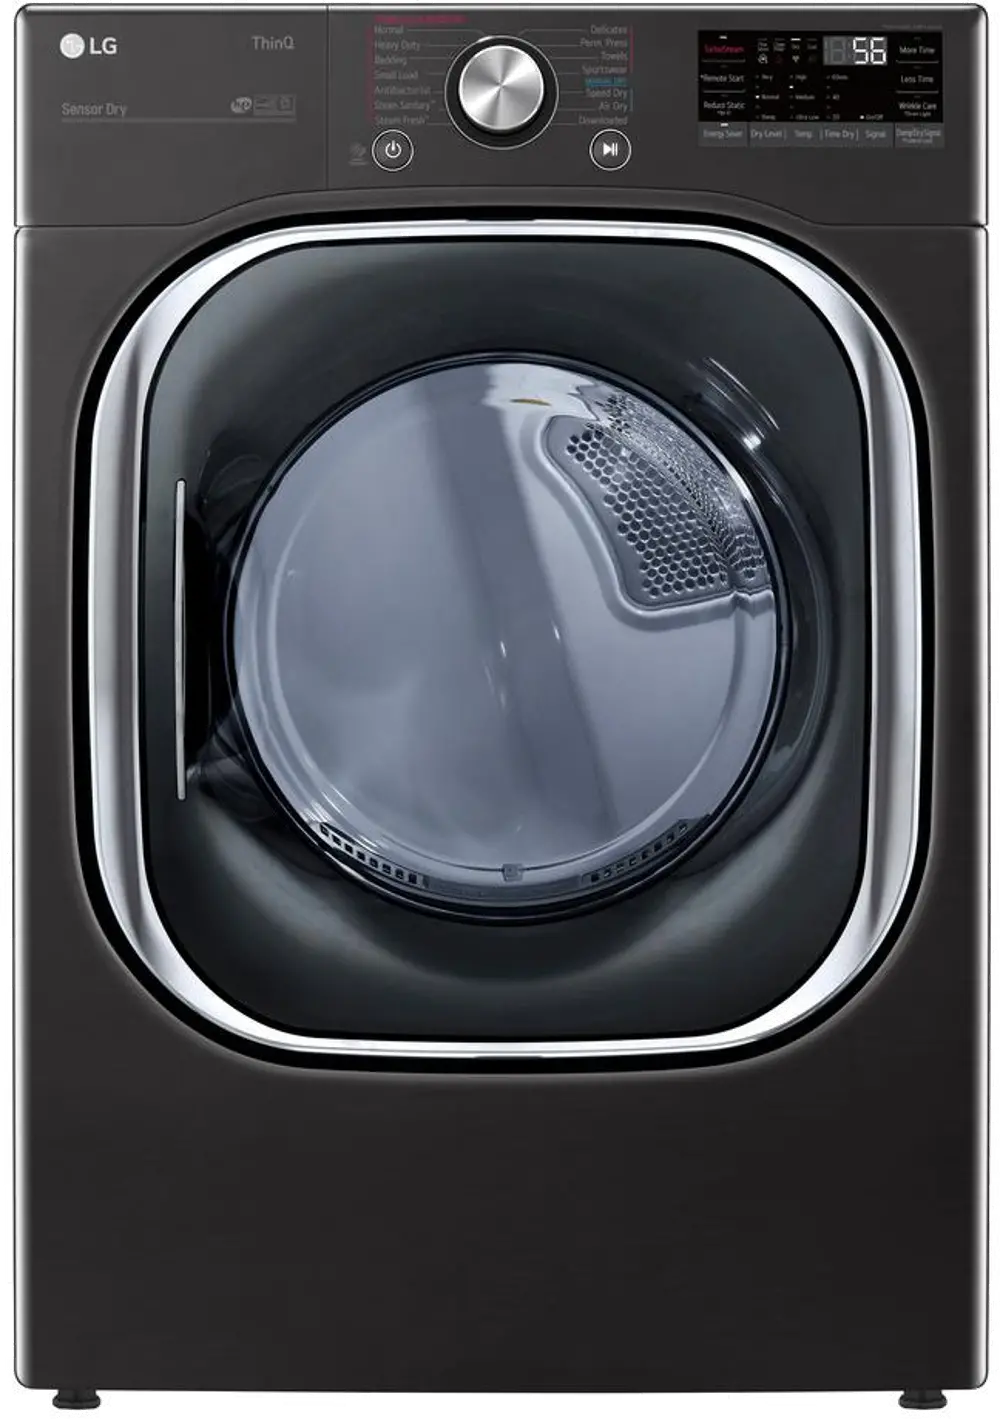 DLEX4500B LG Electric Front Load Dryer with TurboSteam and Built-In Intelligence - 7.4 cu. ft. Black Steel-1